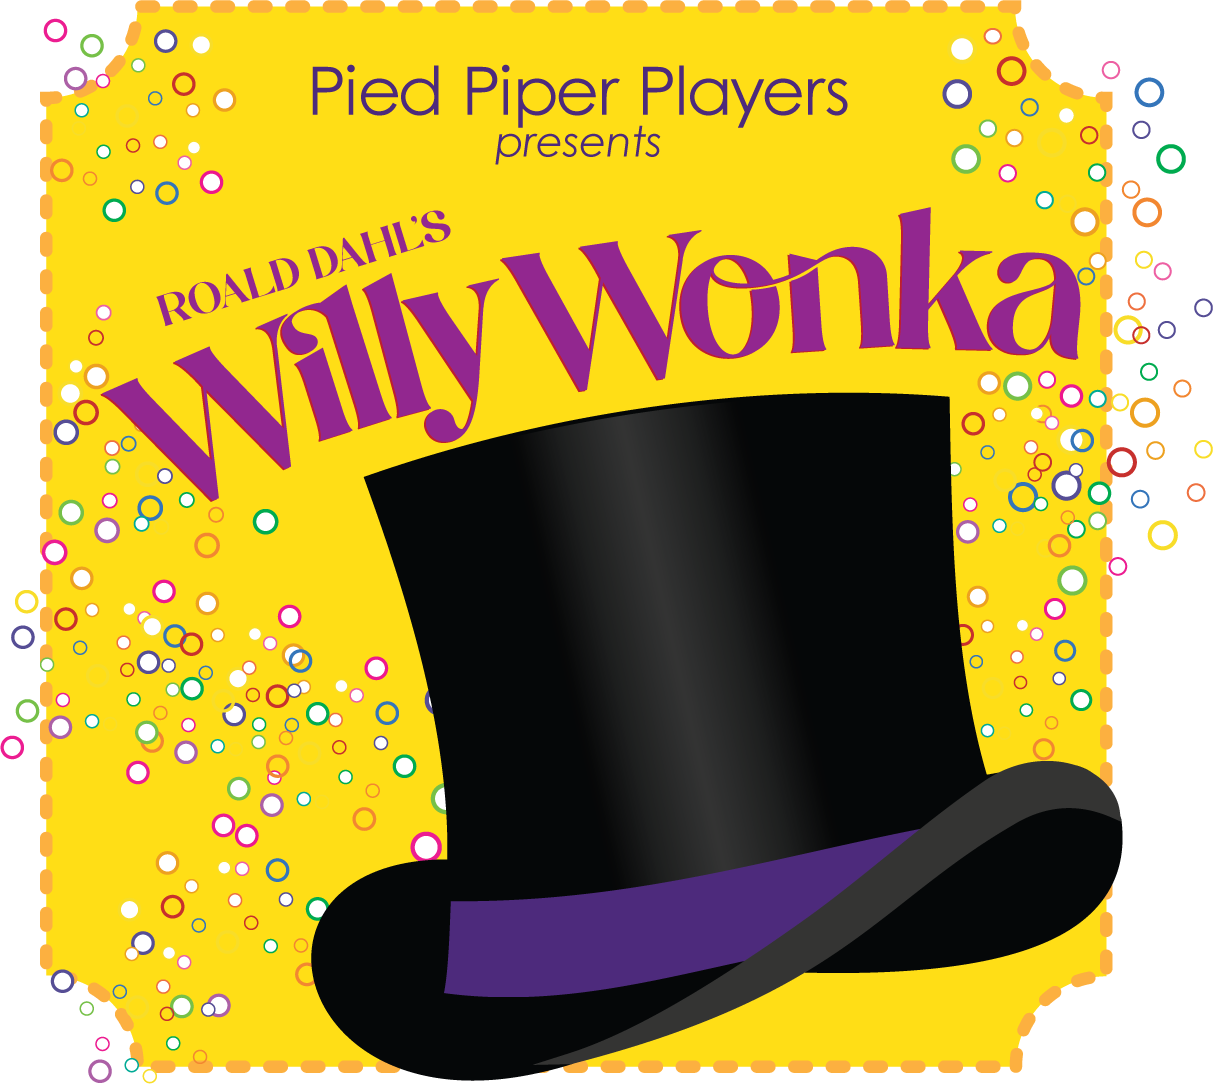 Pied Piper Players Willy Wonka